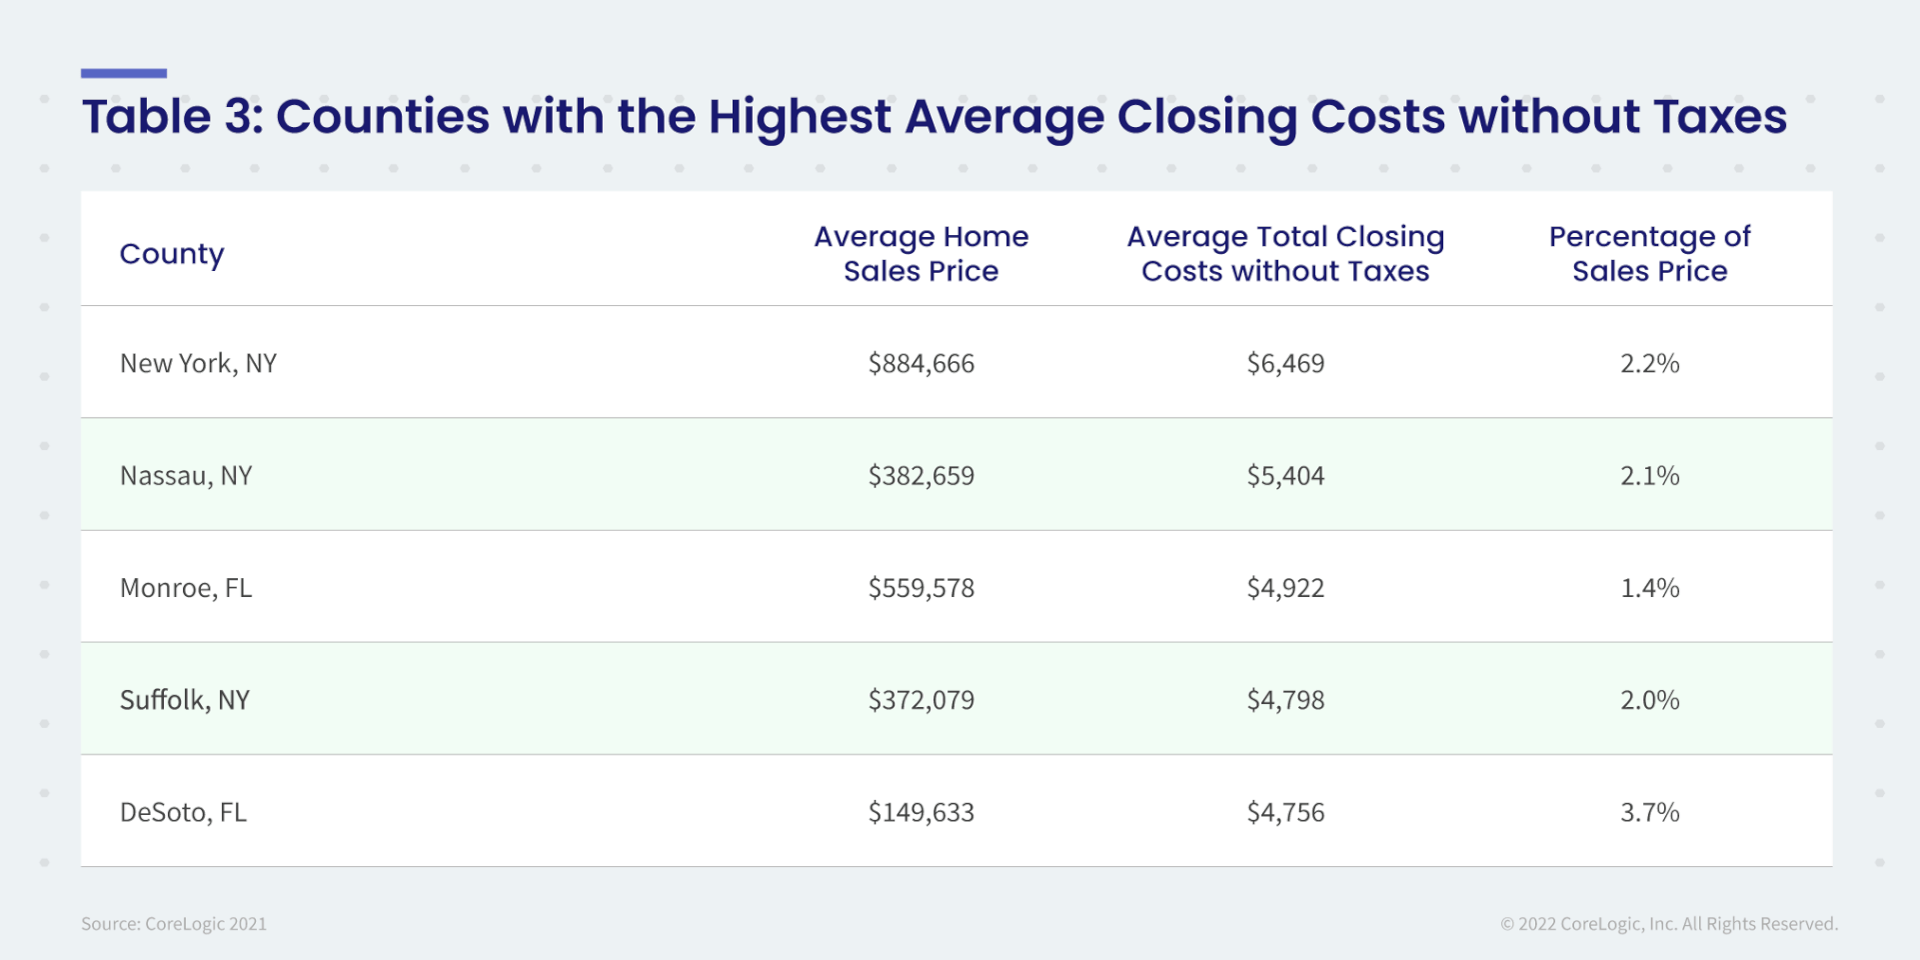 Table 3: Counties with the Highest Average Closing Costs without Taxes